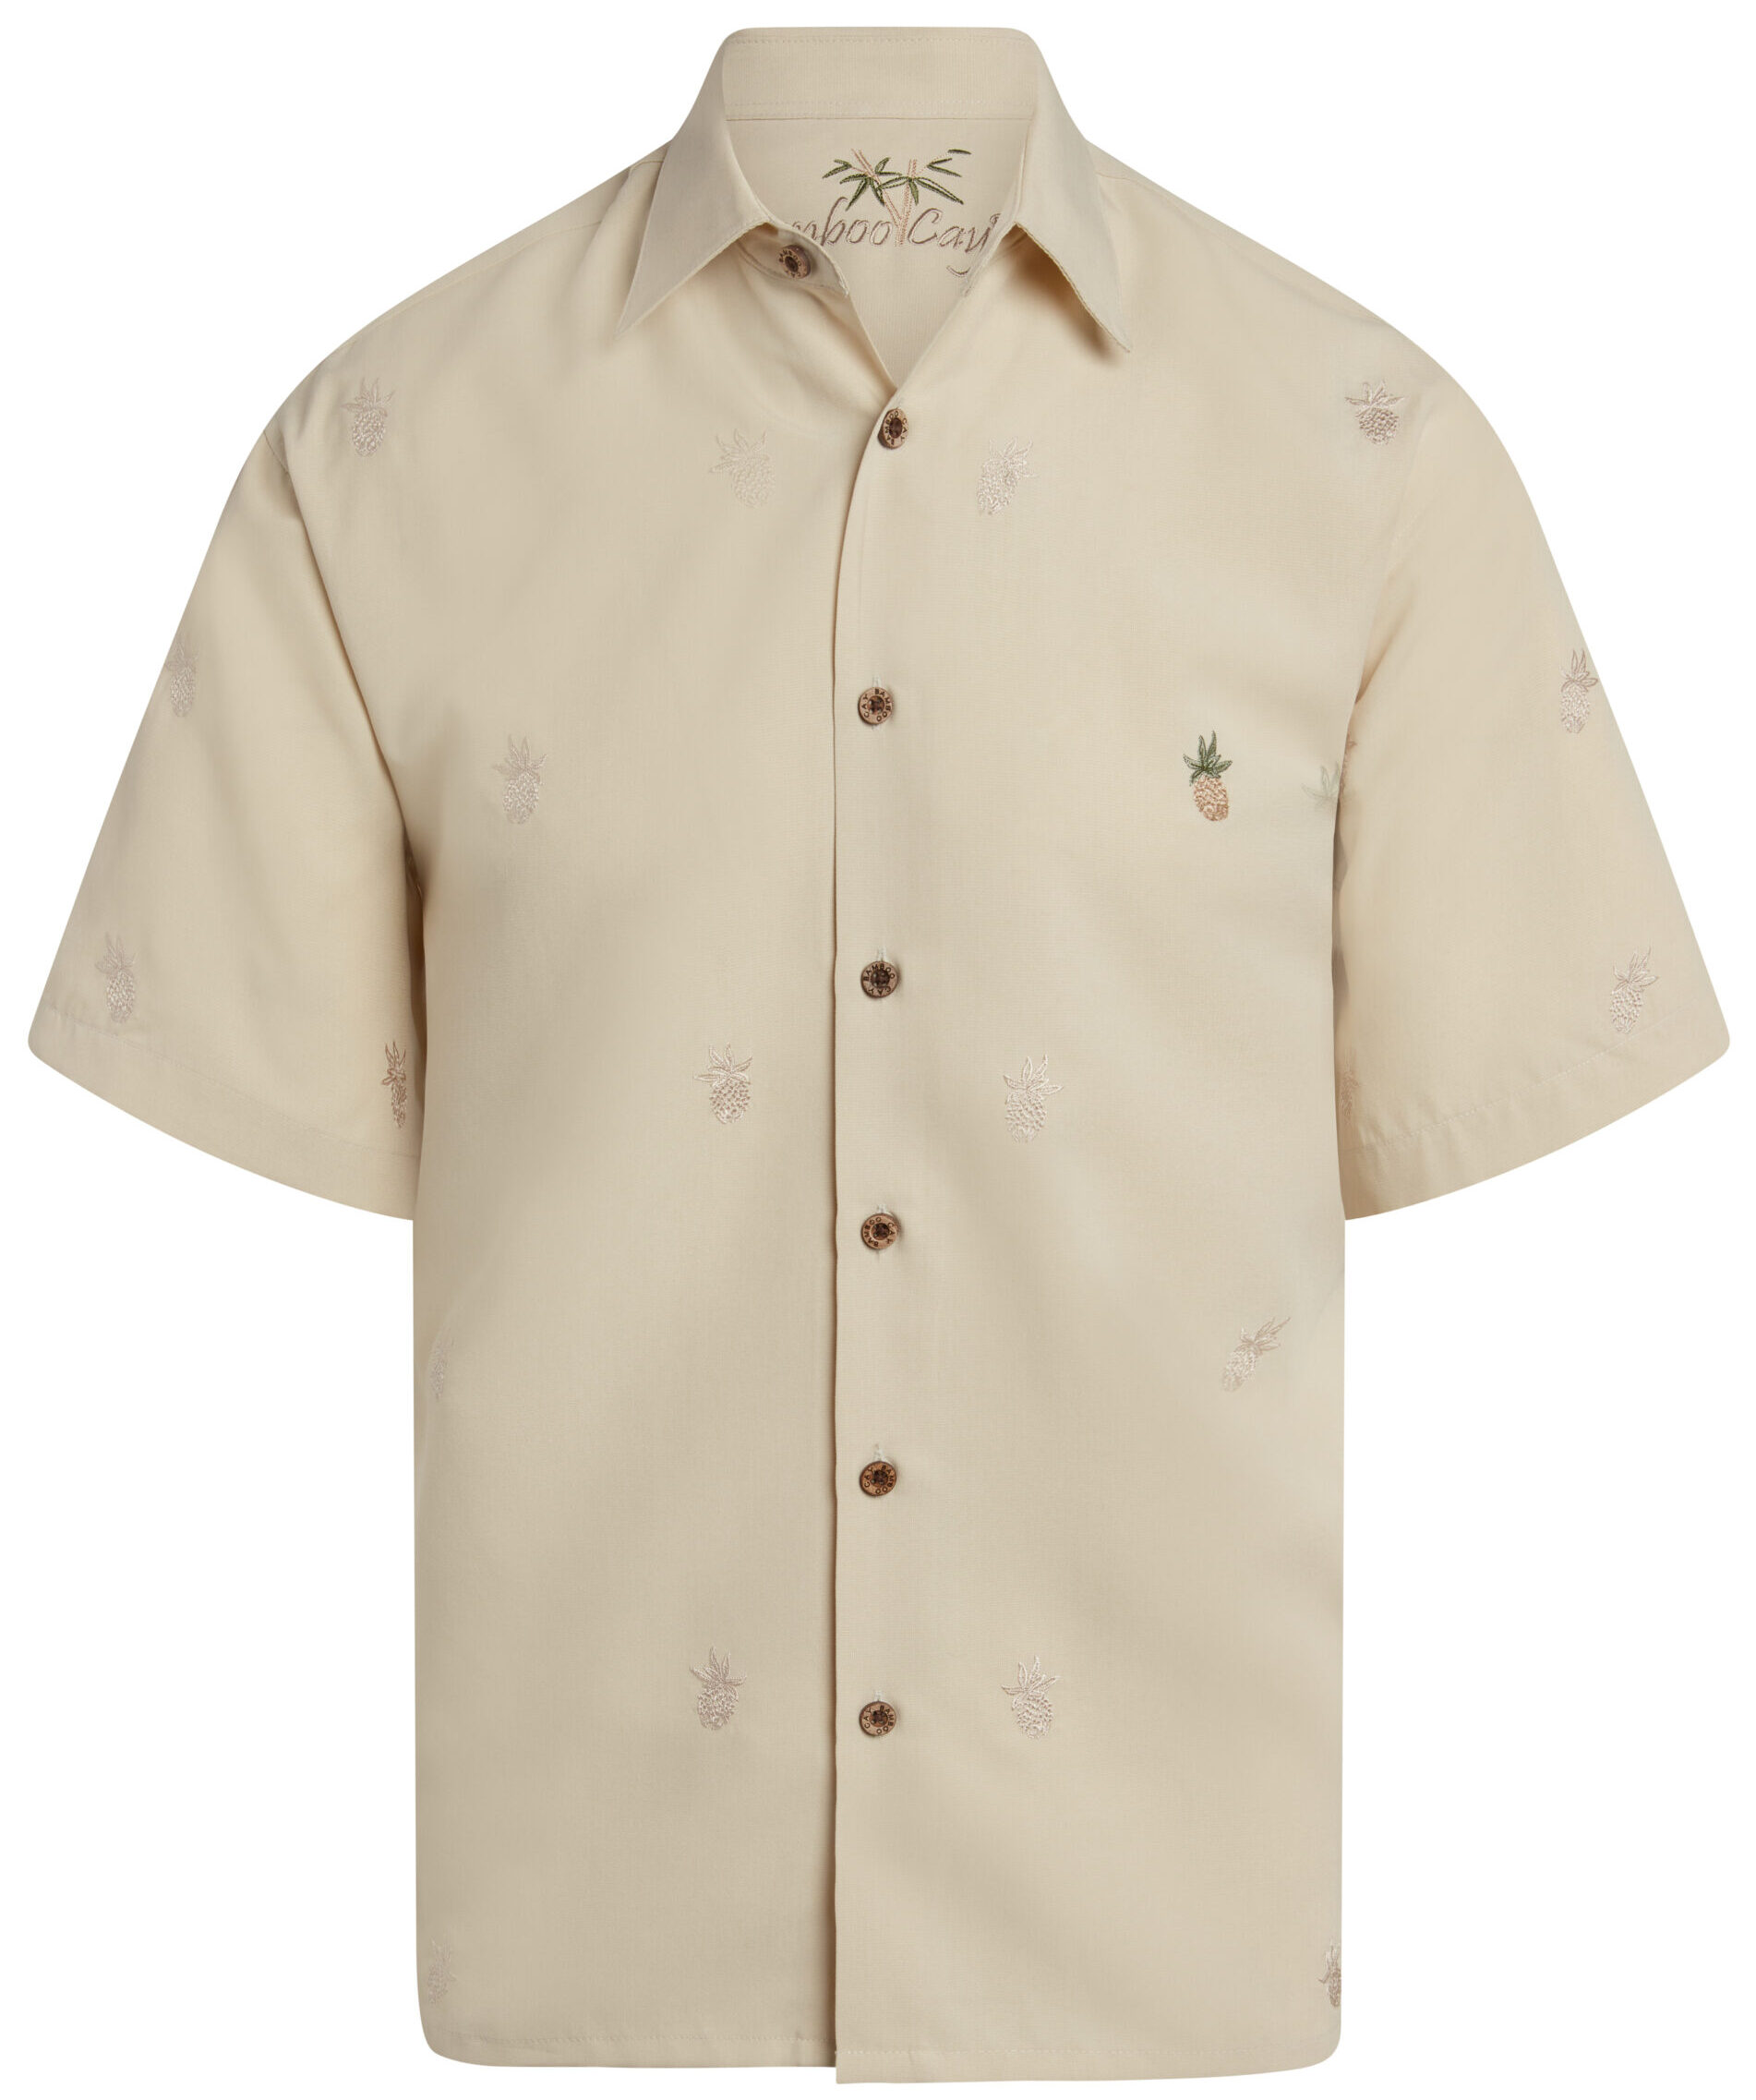 Bamboo Cay short sleeve shirt embroidered pineapple woven shirt